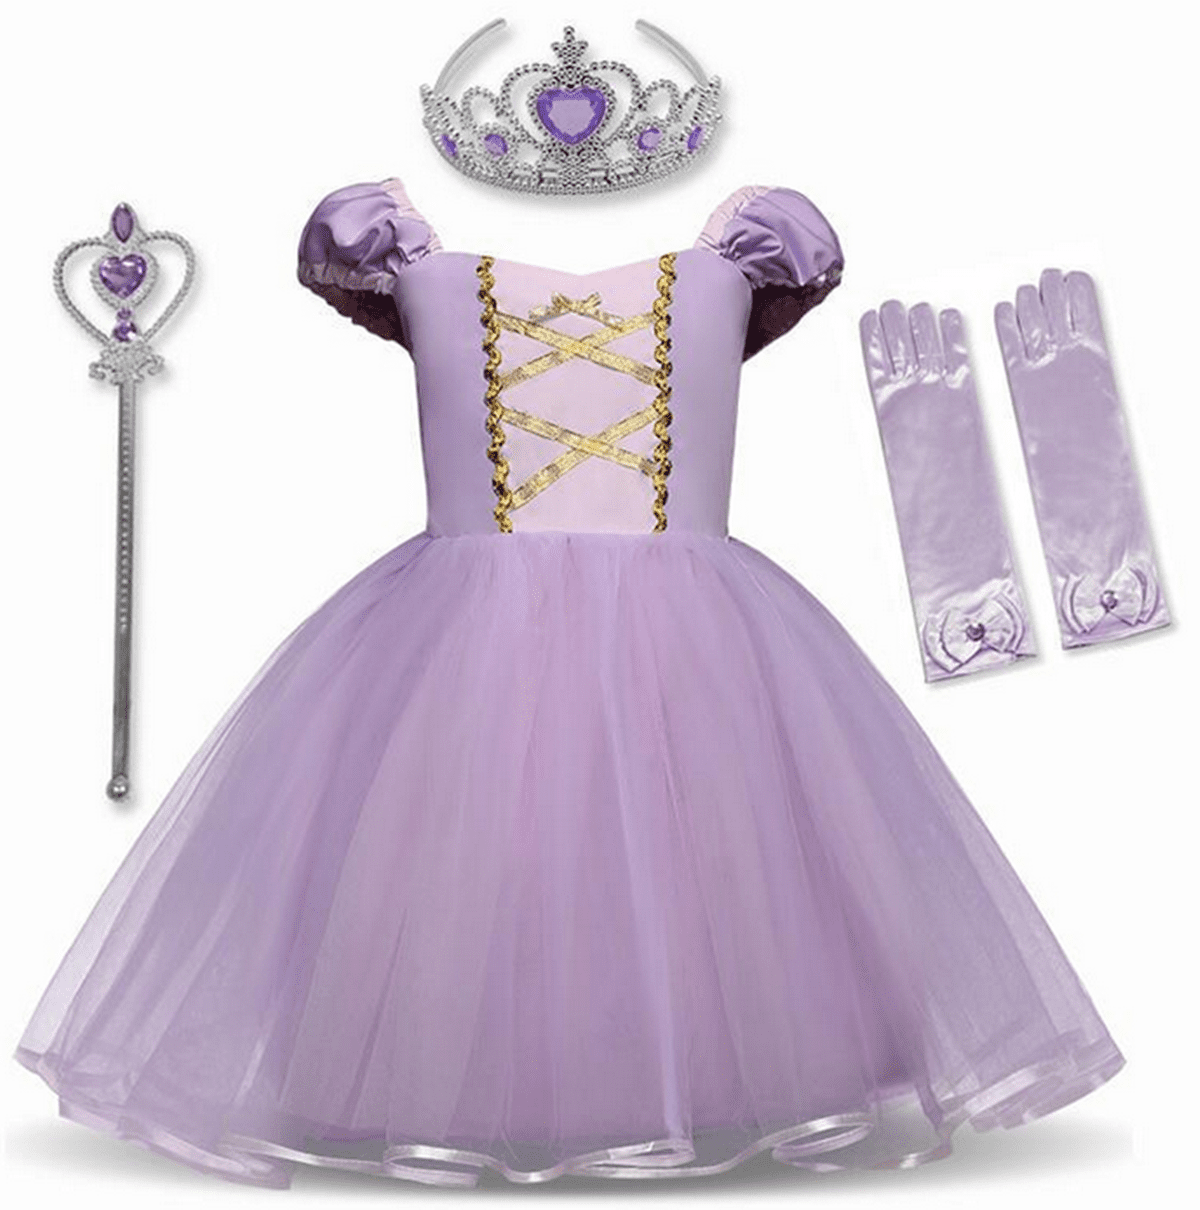 Yansion Princess Dress Up Party Costume Accessories Belle Gift Set for Princess Cosplay Tiara,Wand and Gloves Pink 